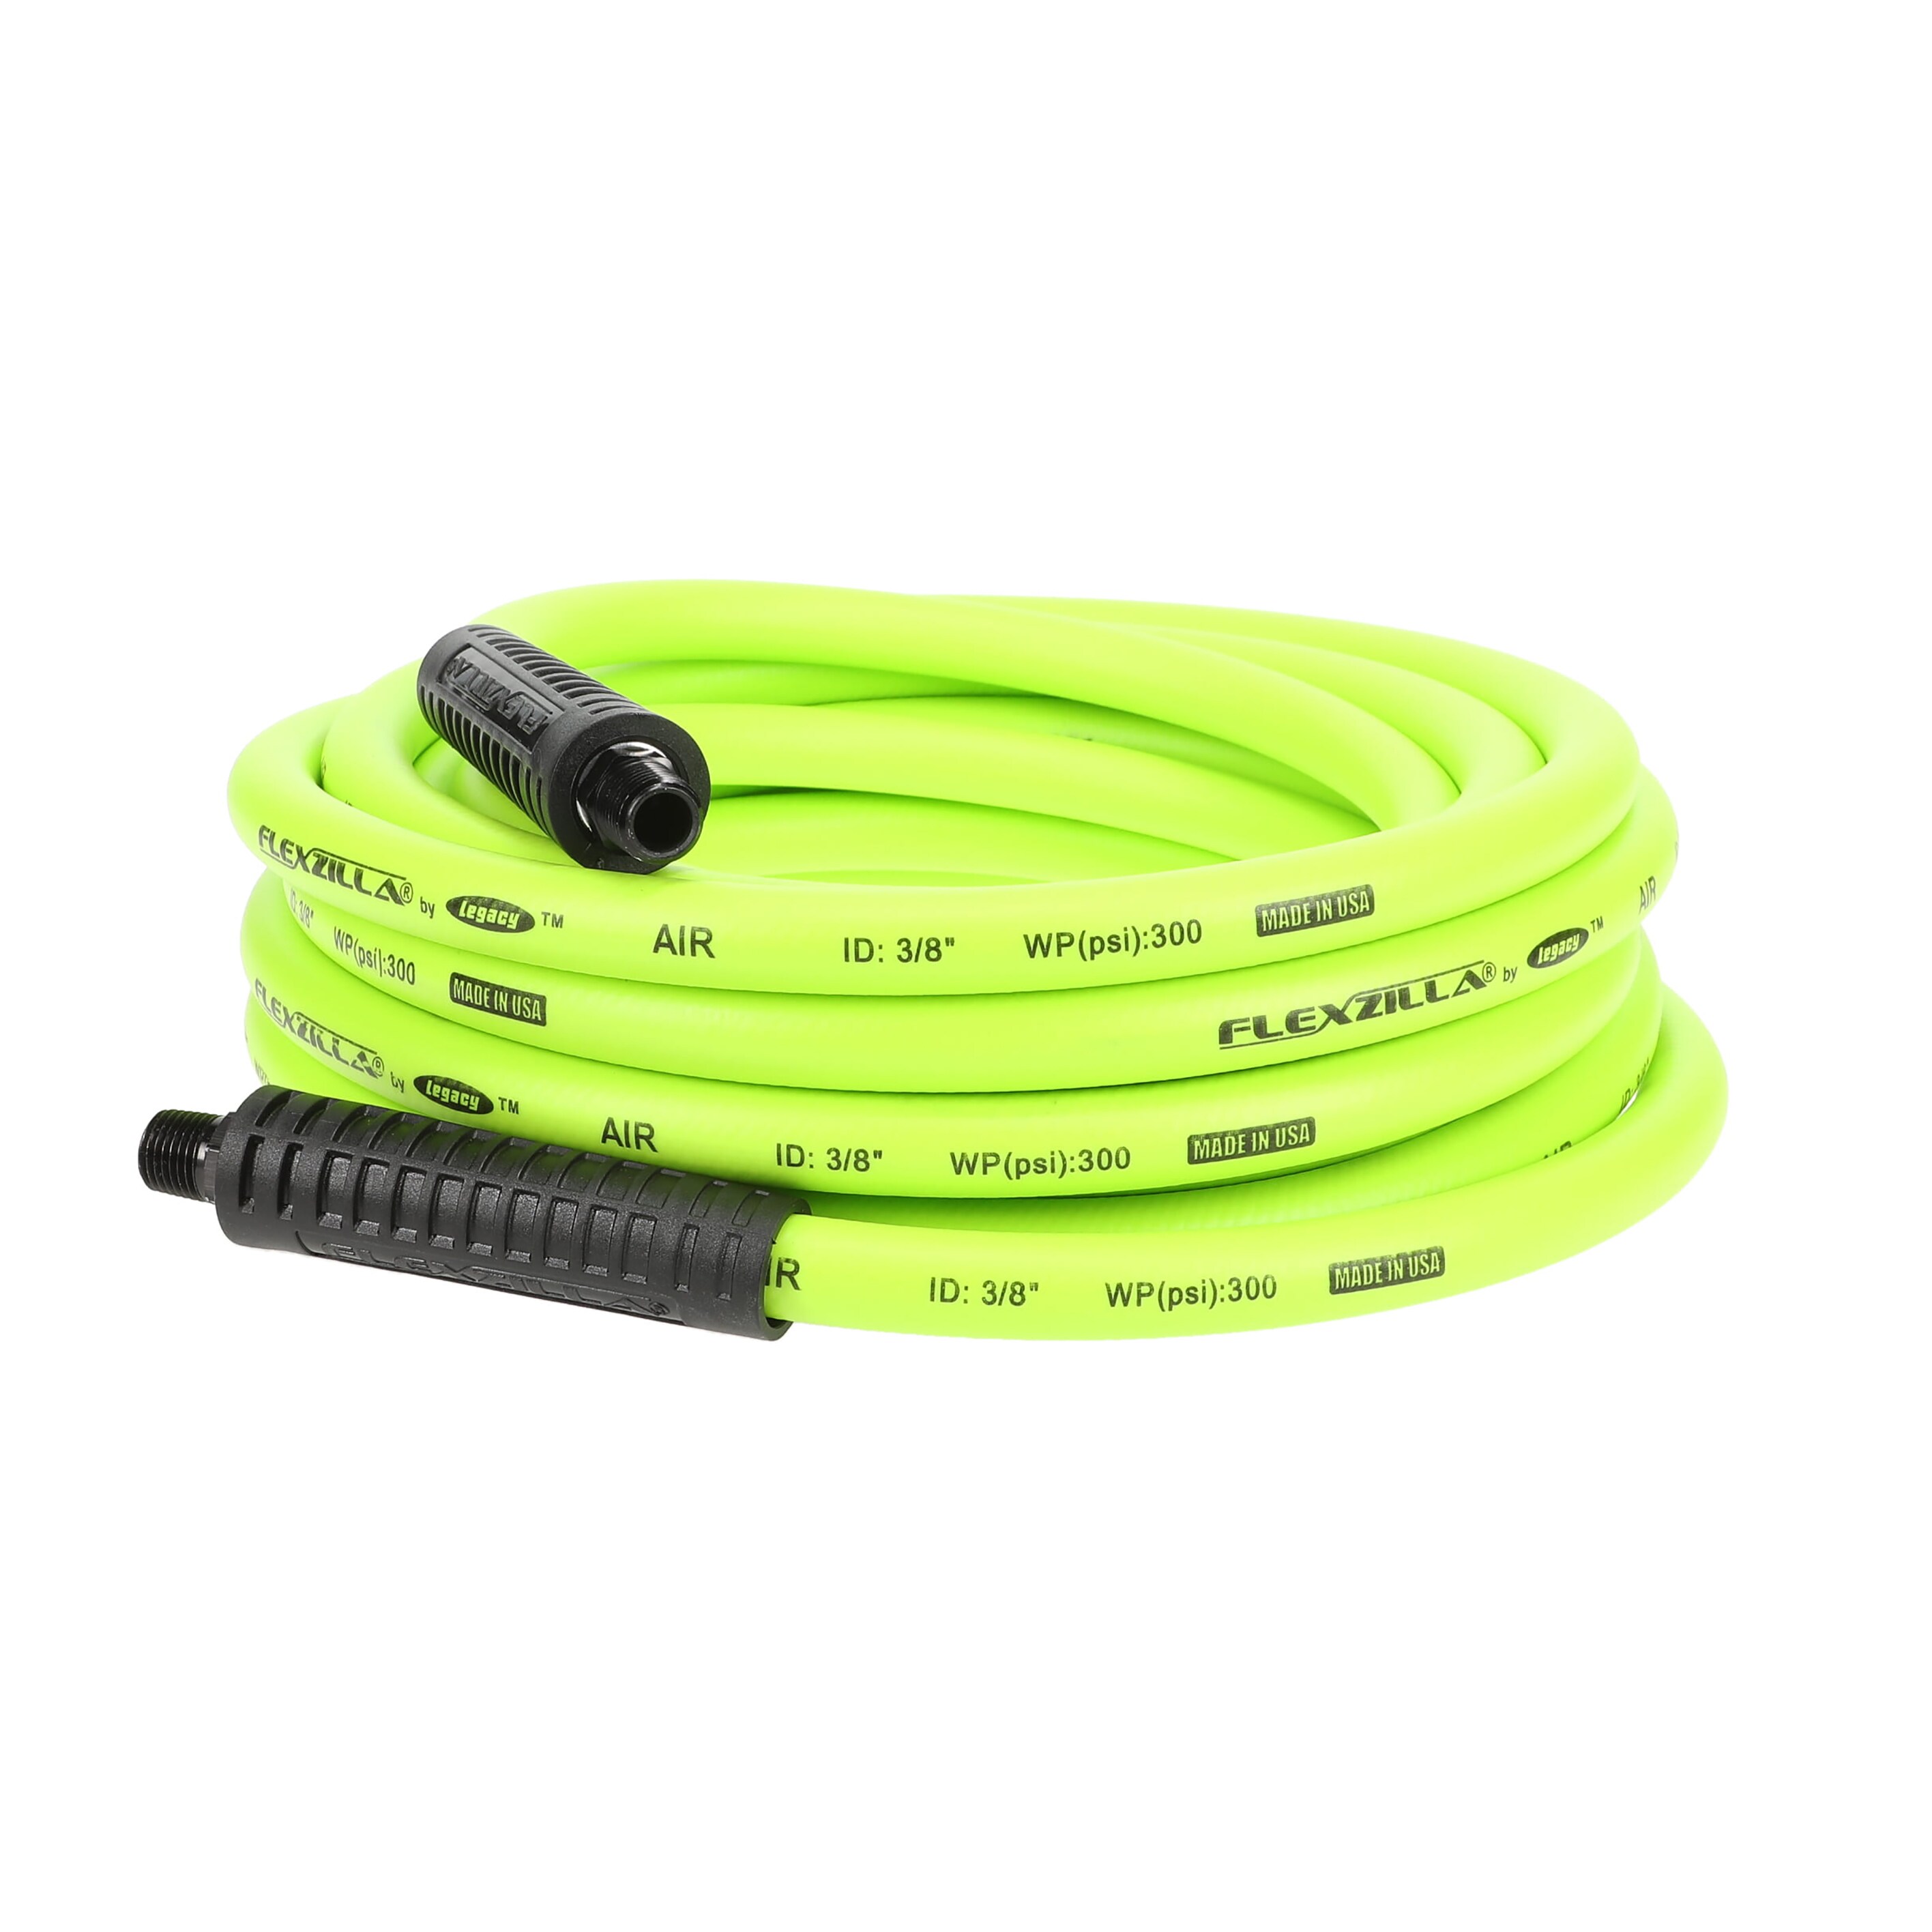 Flexzilla Air Hose, 3/8-in x 25-ft, 1/4-in Mnpt Fittings in the 